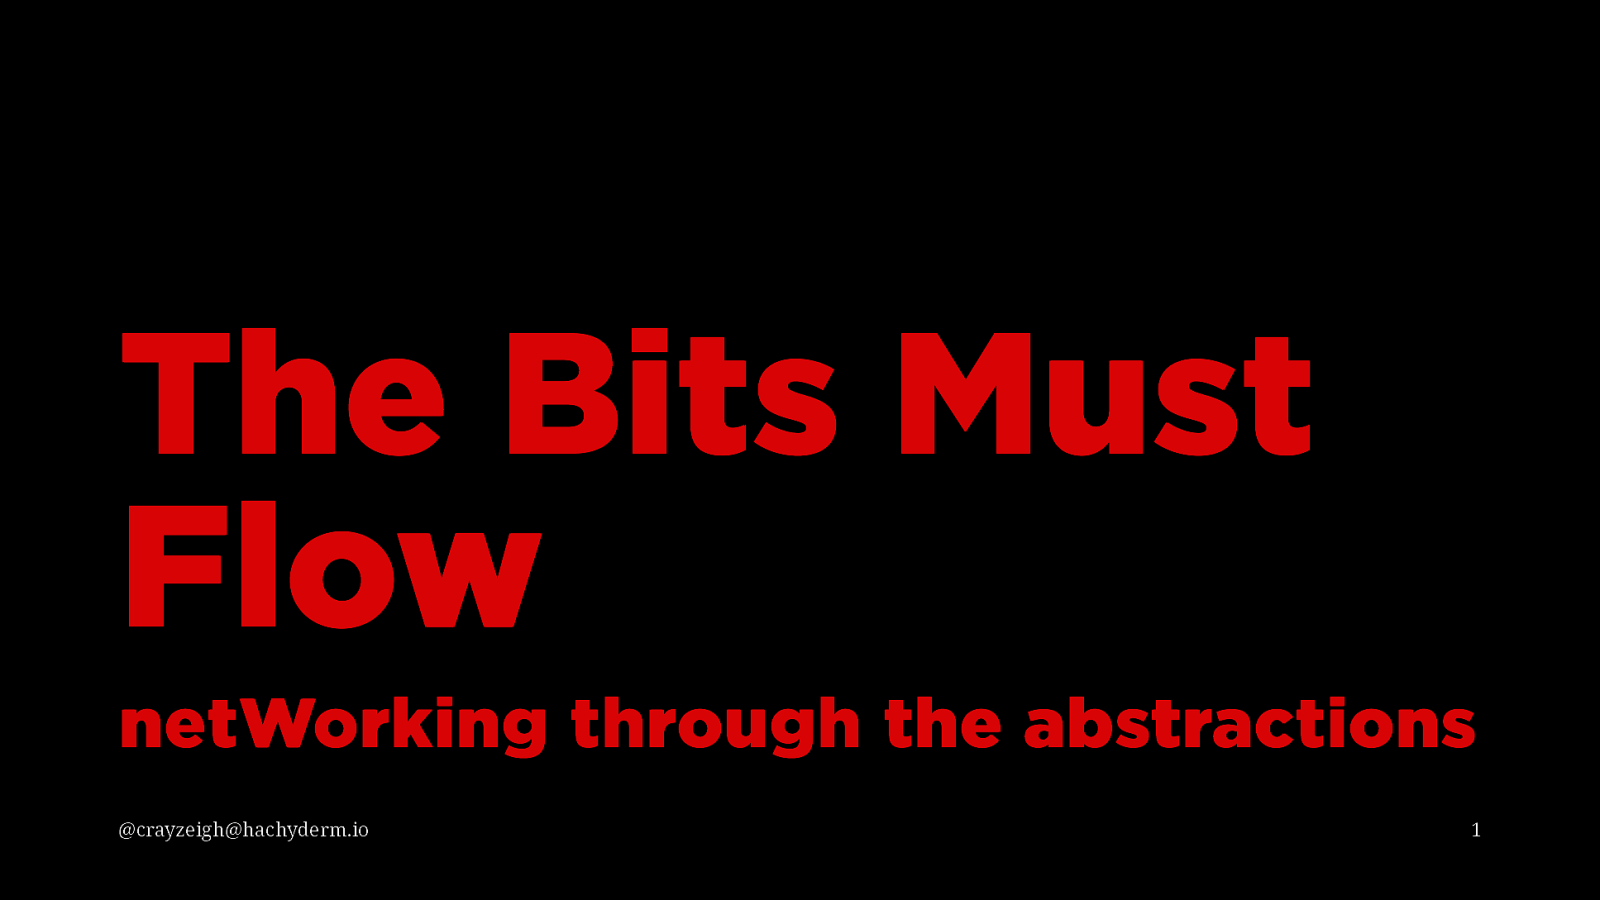 The Bits Must Flow: Networking through the abstractions